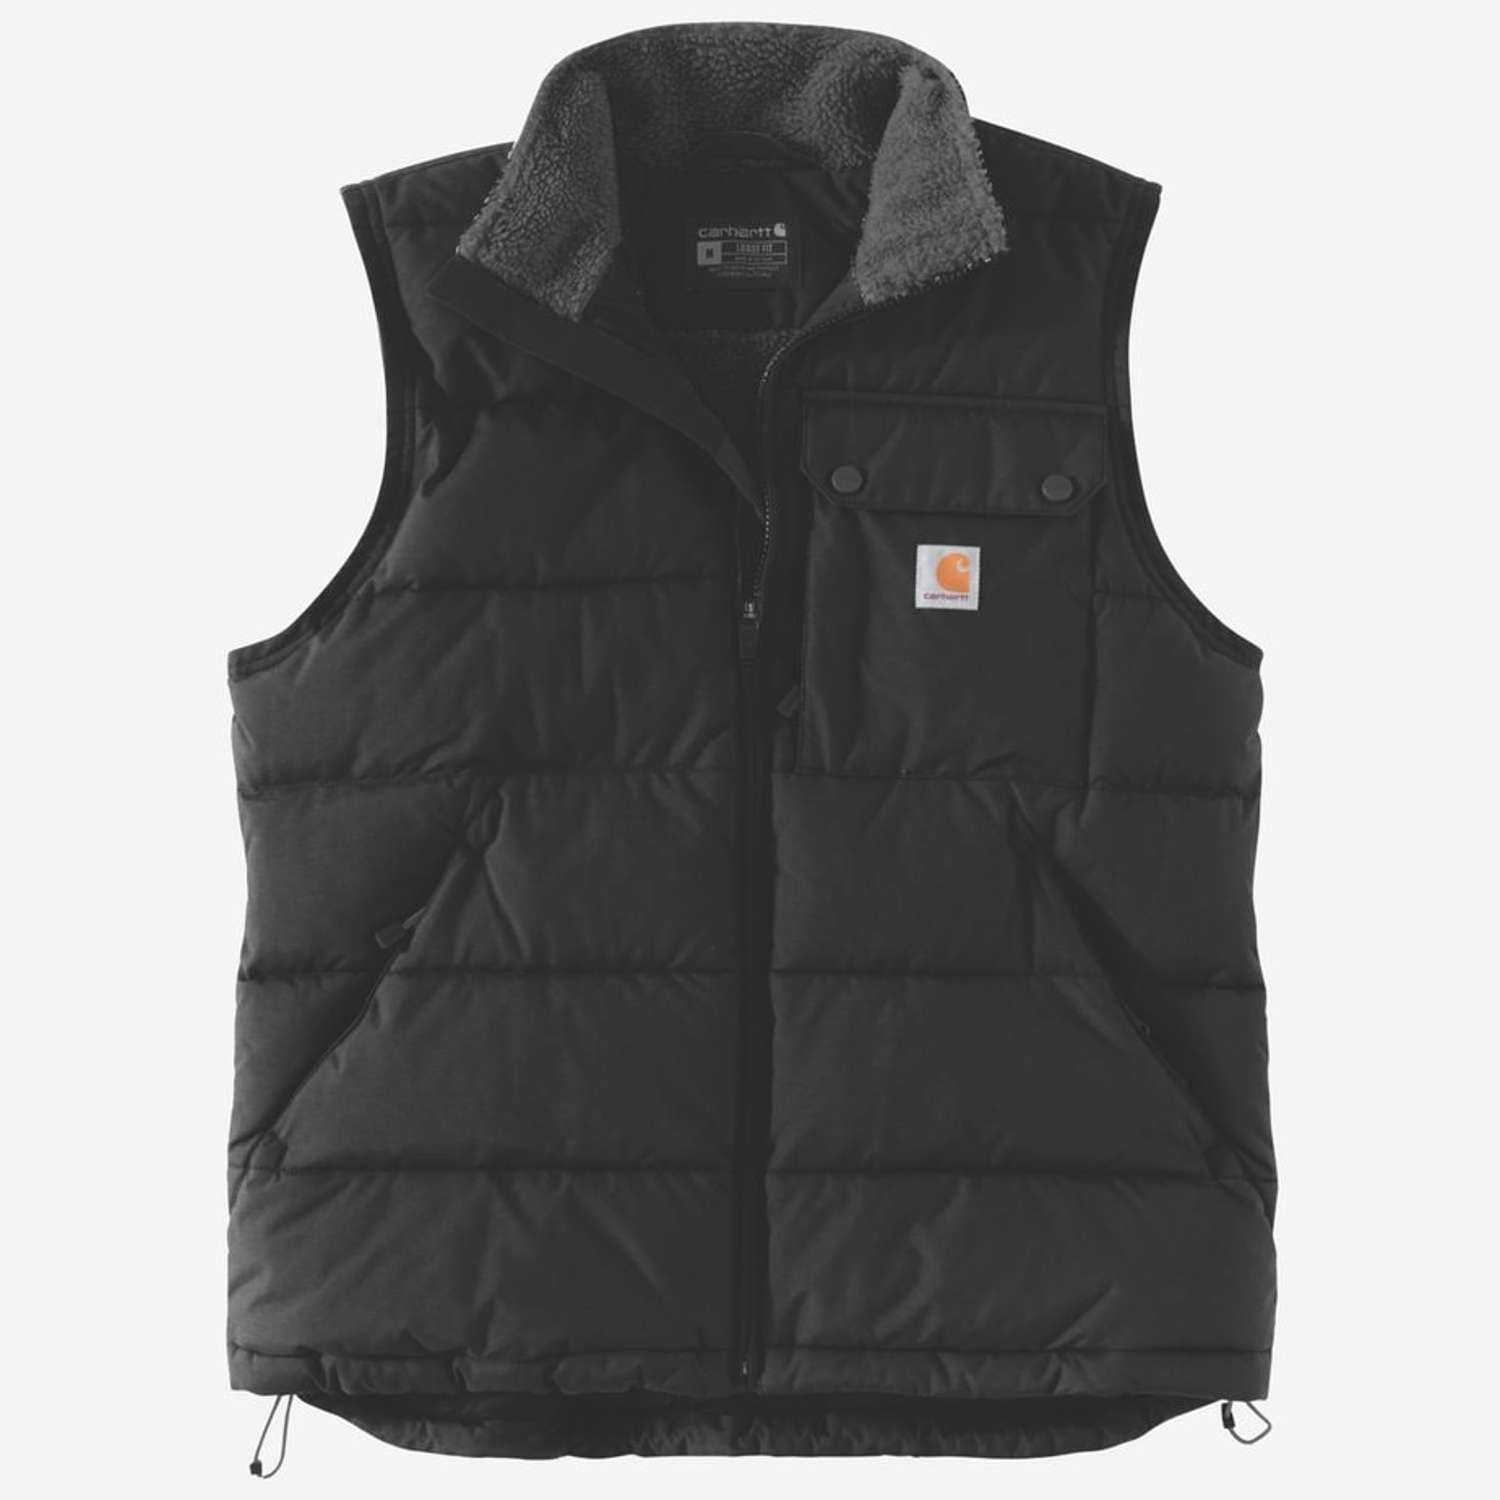 Se CARHARTT Loose Fit Midweight Insulated Vest BLACK - M hos Toolster.dk